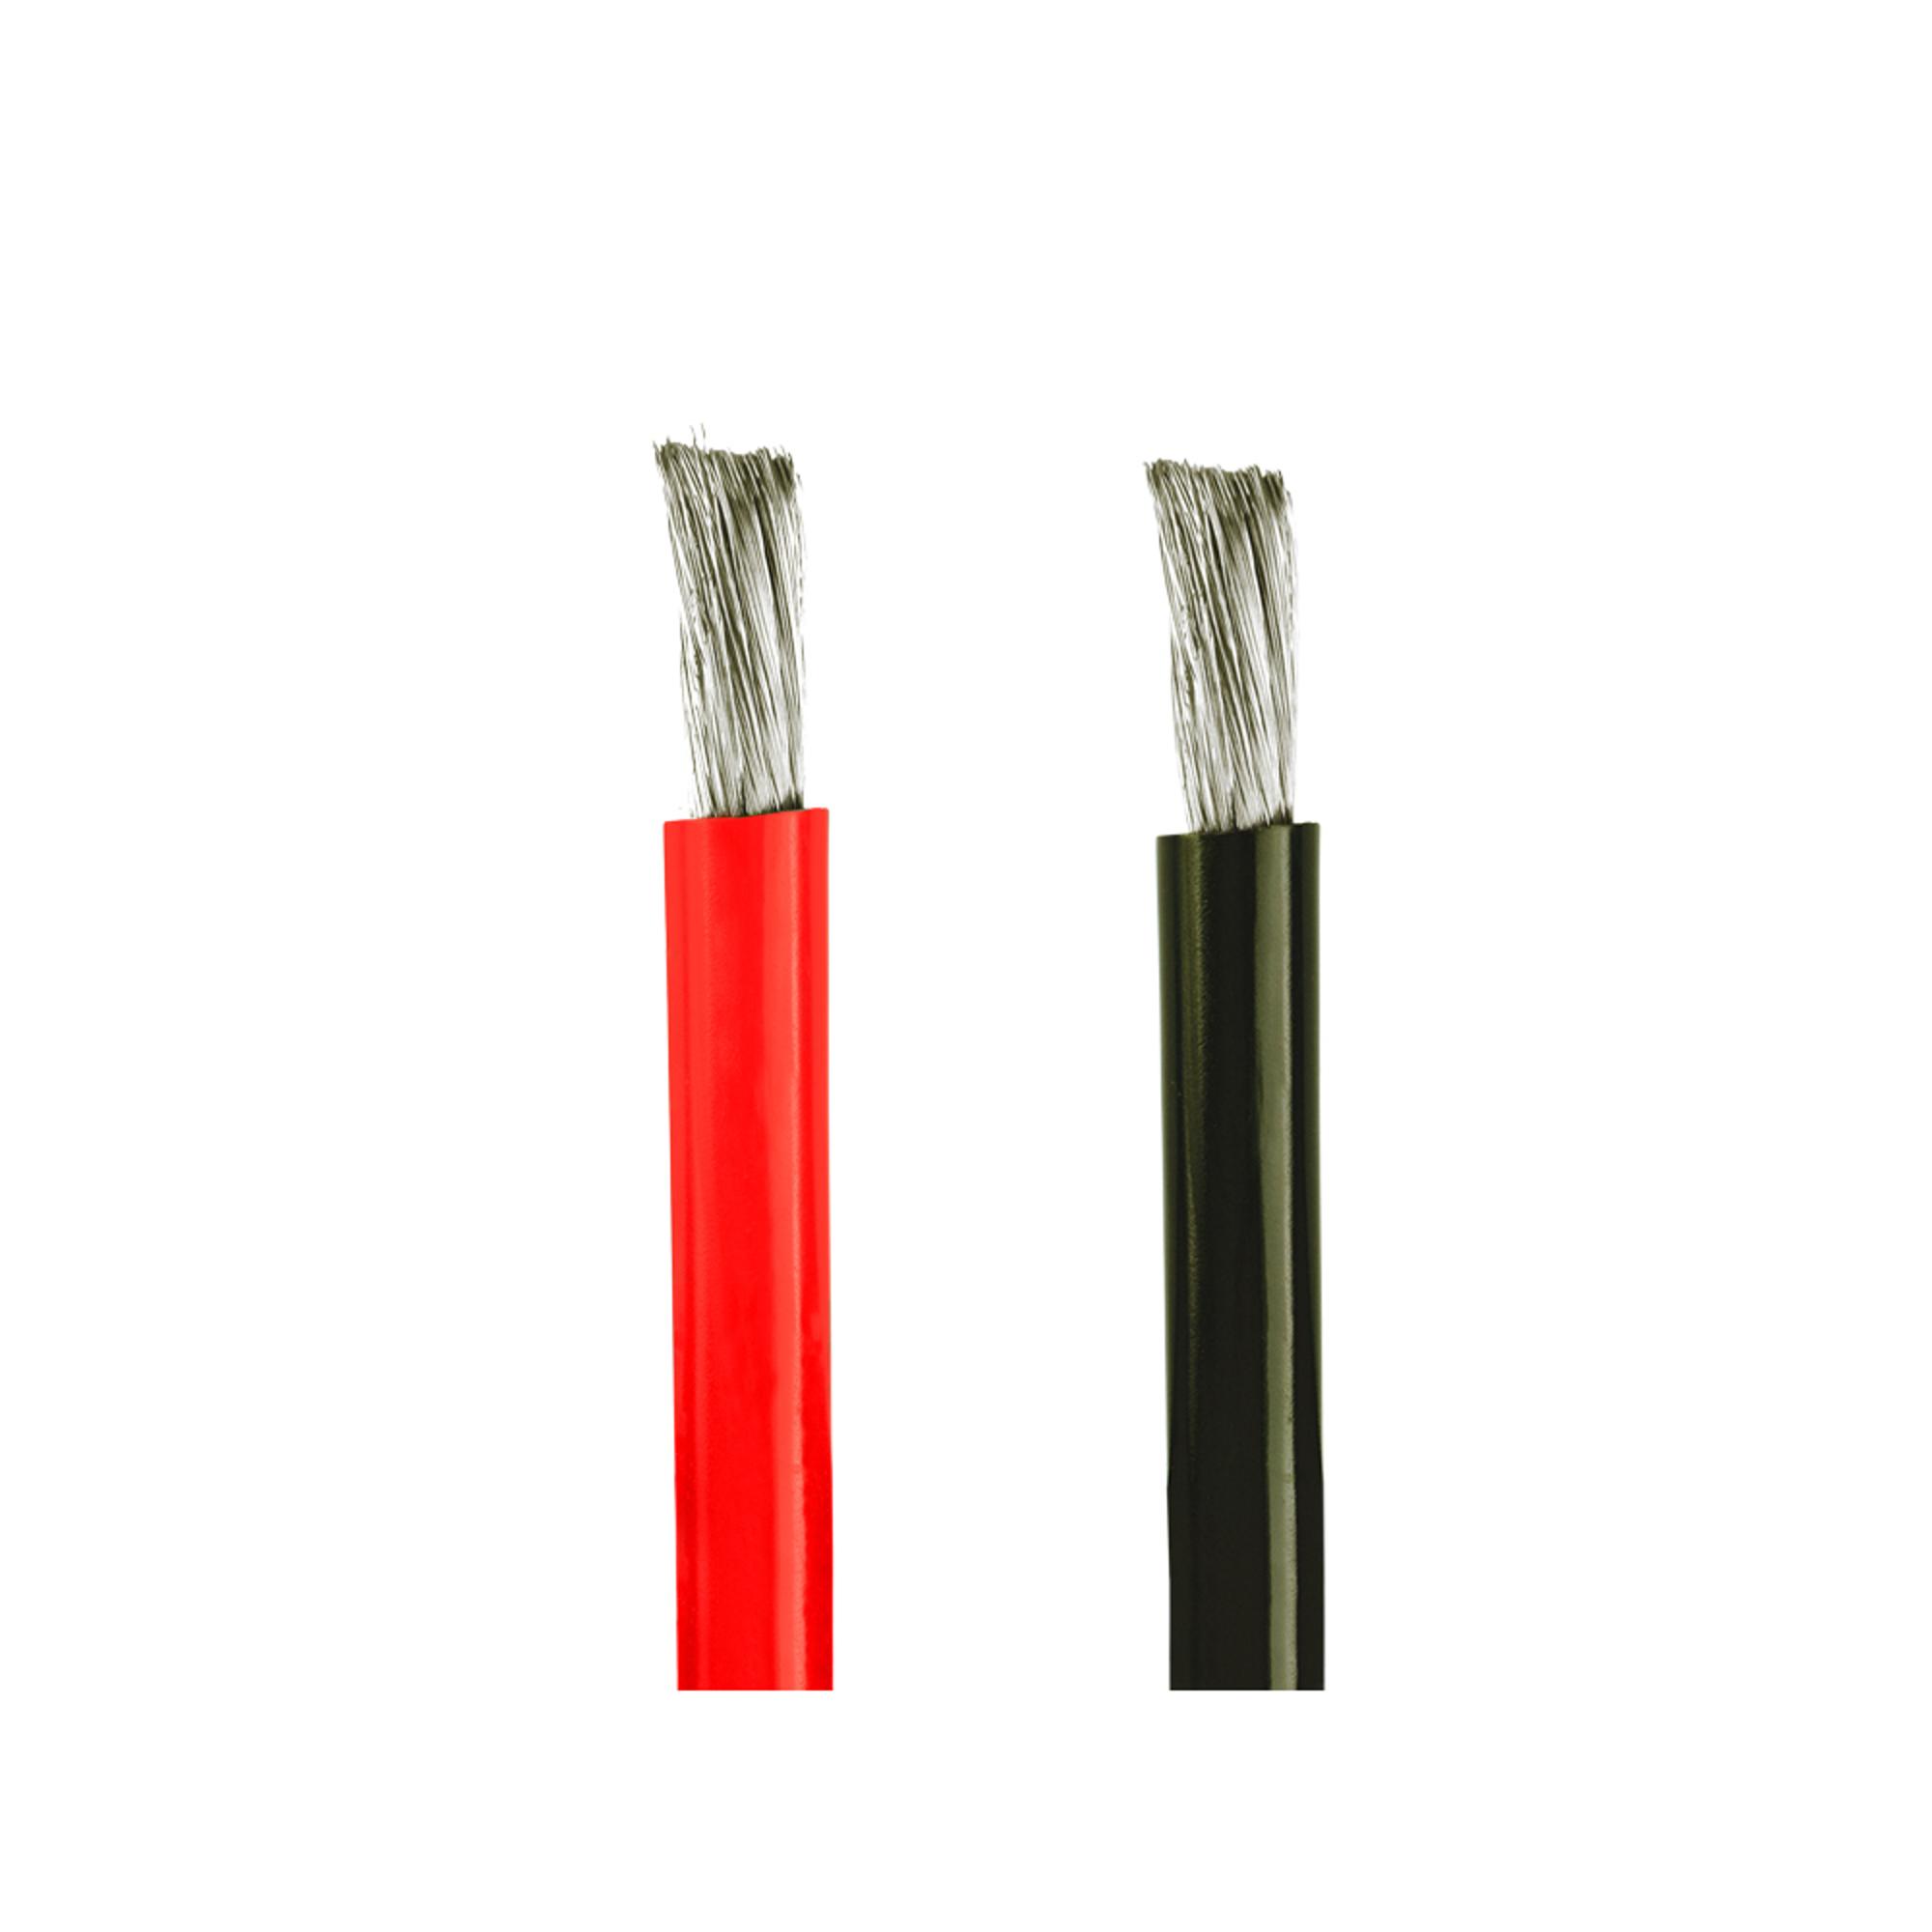 8 Gauge (8 AWG) Silicone Wire (3ft, Black/Red)